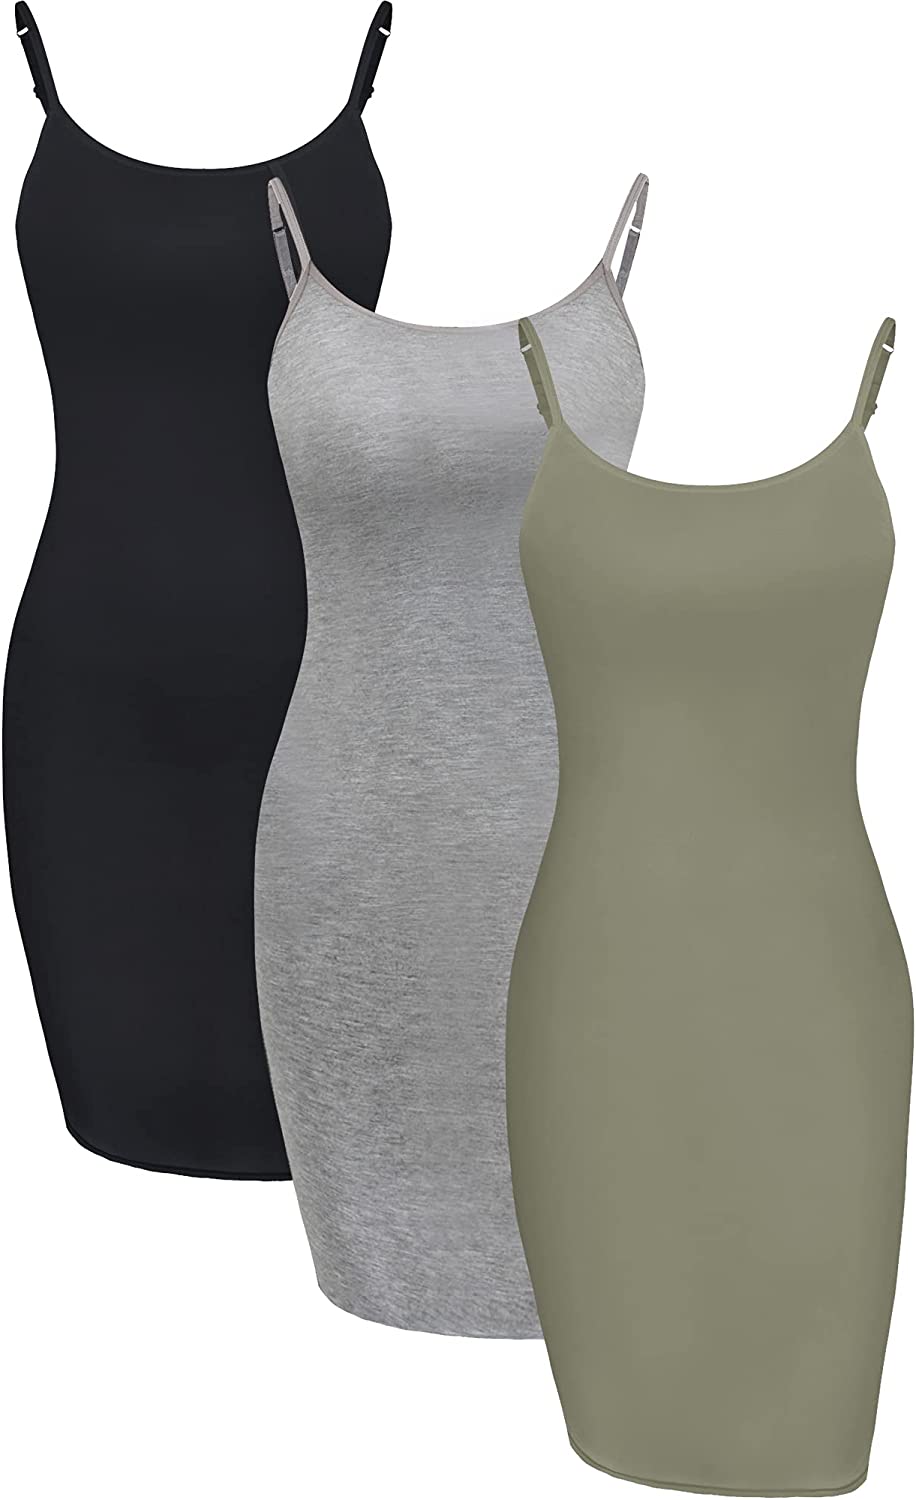 Women's Cami Tank Top Long Layering Casual Basic Camisole Plain All-match X6Z3 